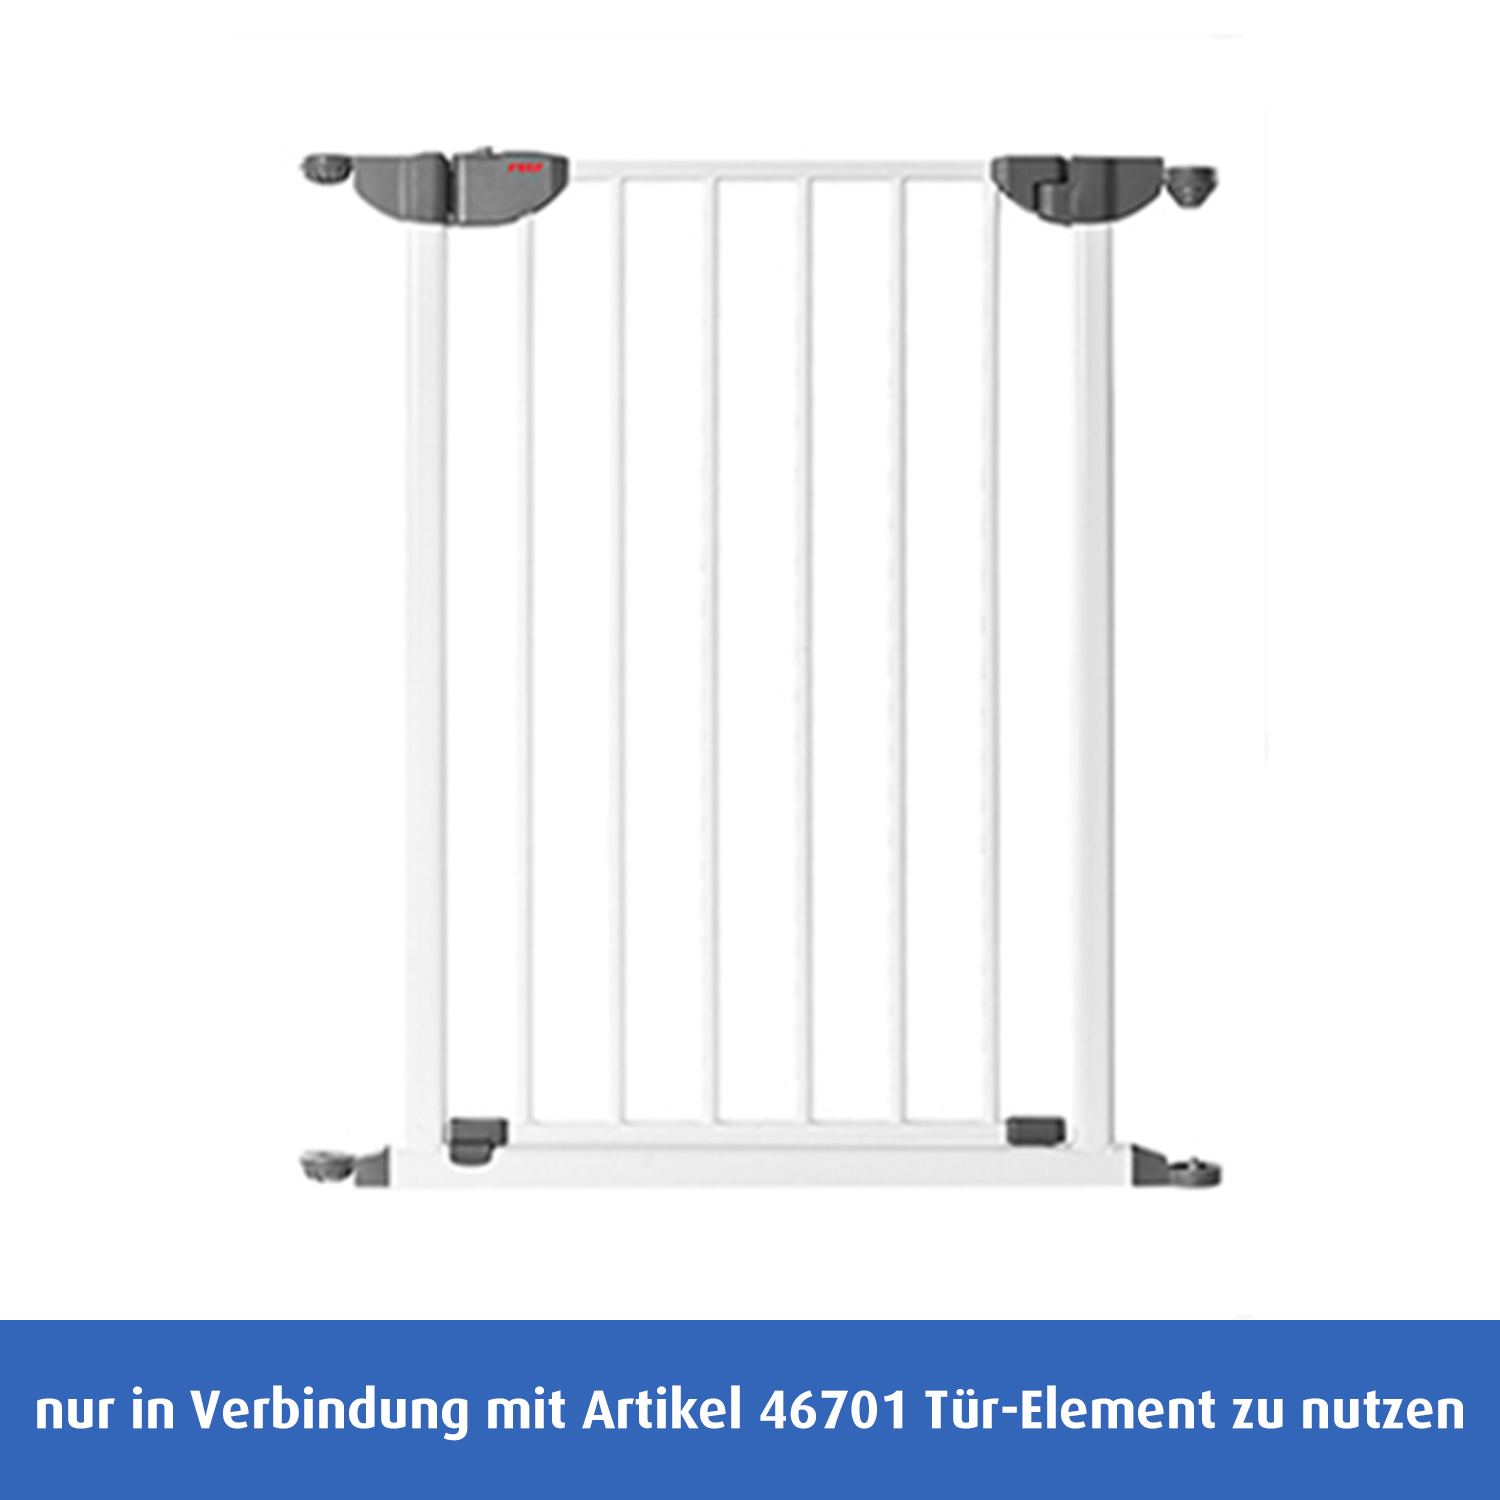 MyGate Modul based safety gate and room divider, extension 60 cm